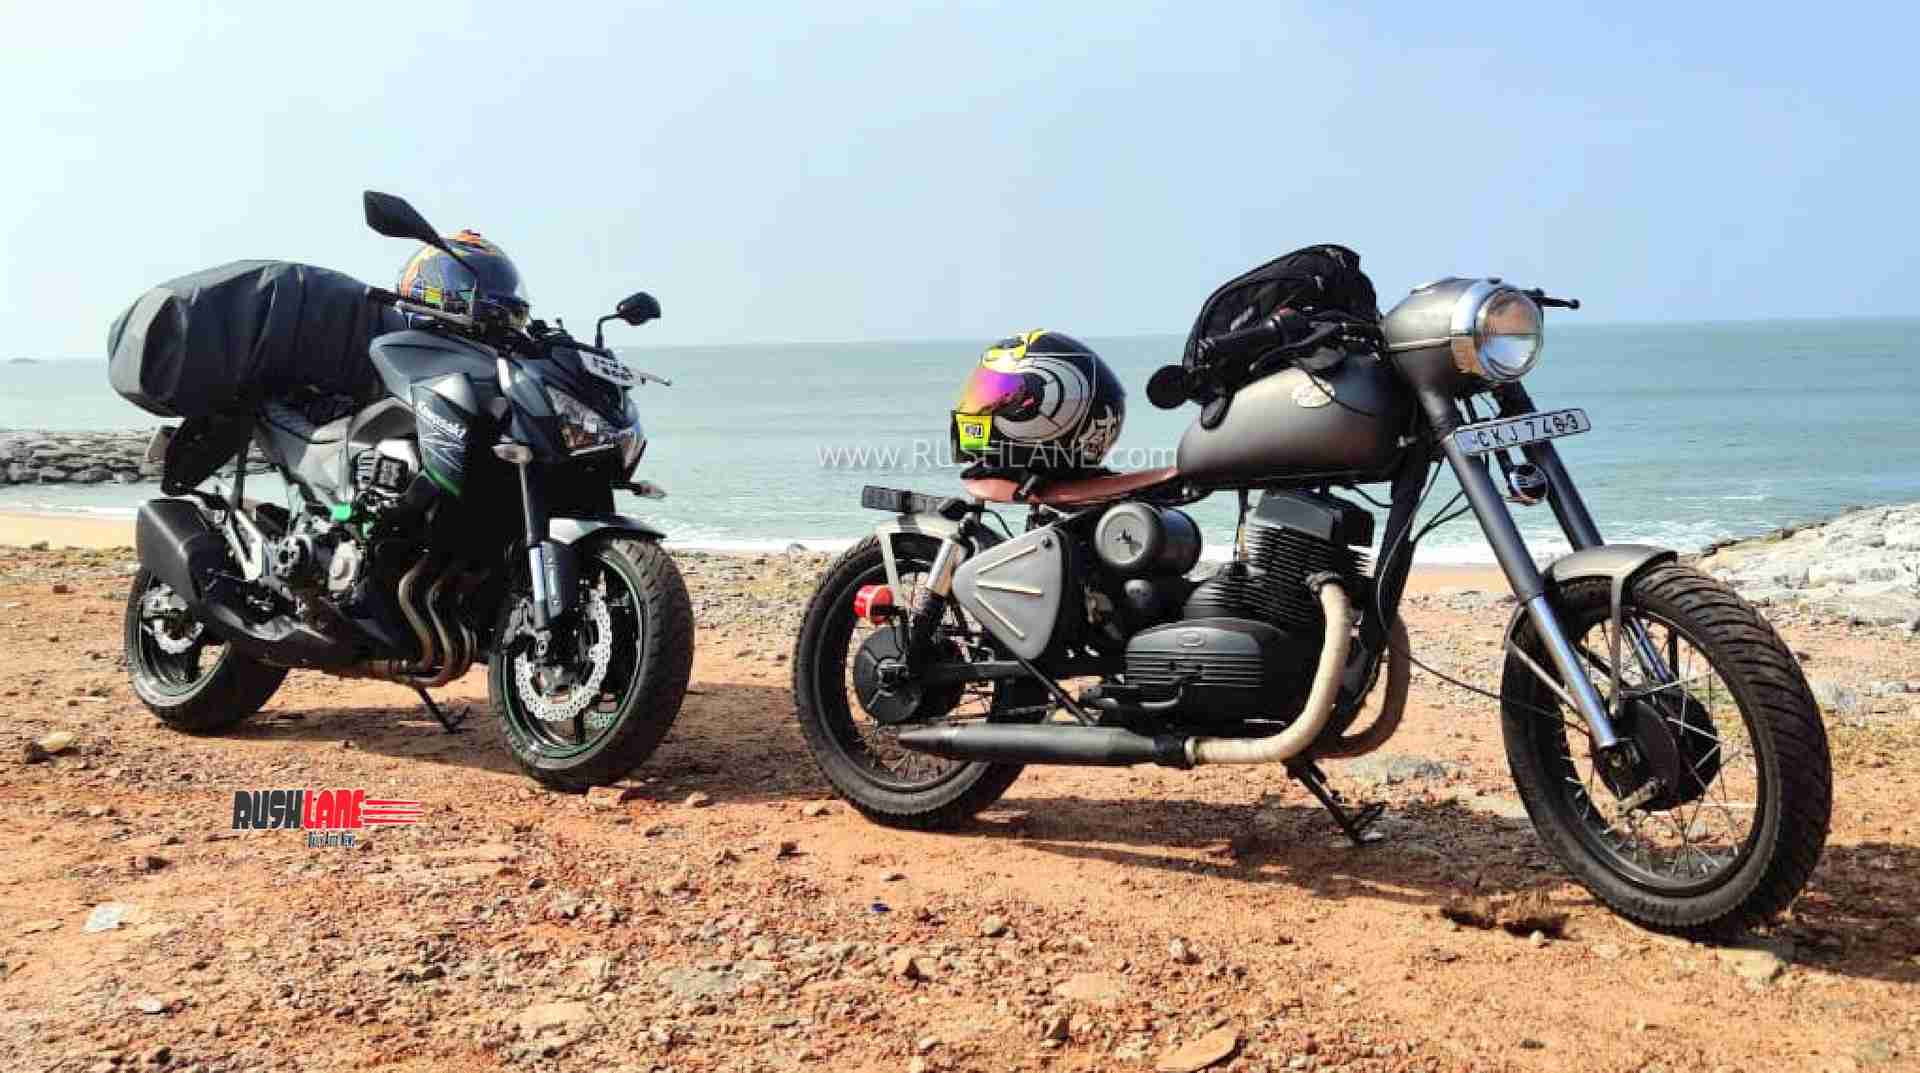 Yezdi Modified Into A Jawa Perak By Owner For Rs 15 Lakhs